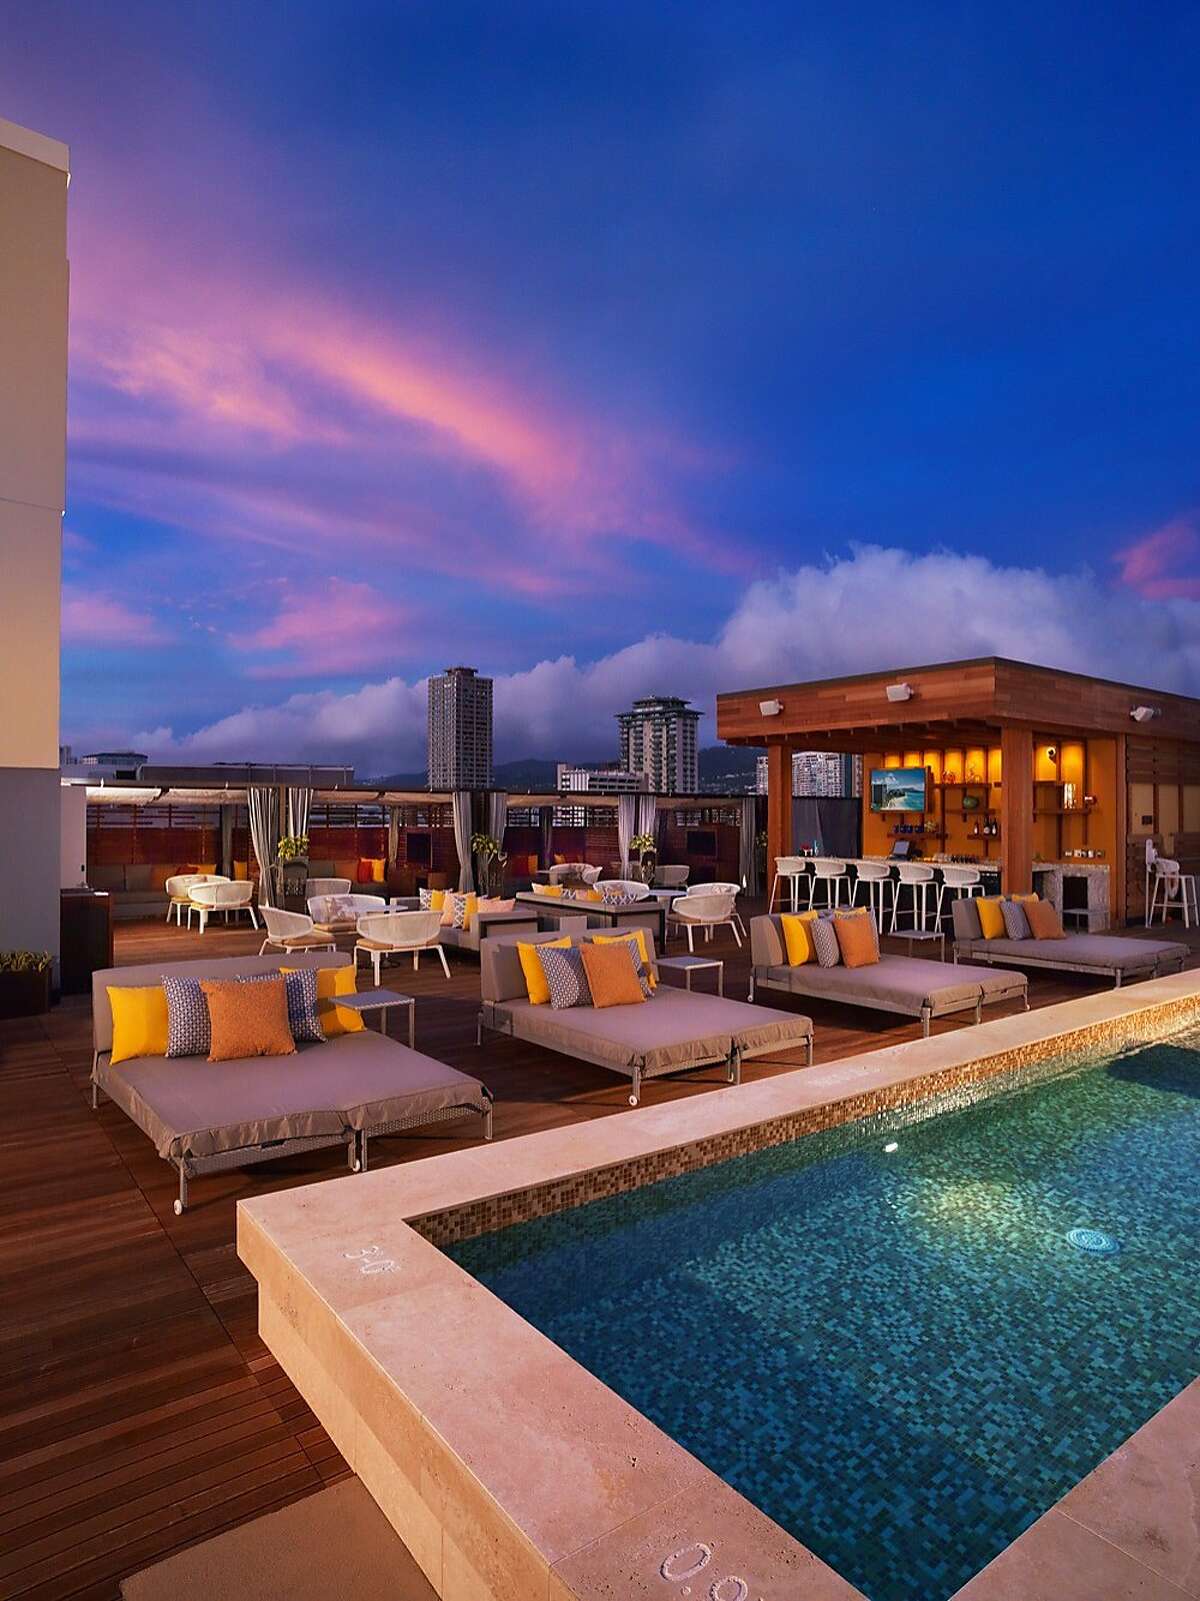 The new Hokulani Waikiki by Hilton Grand Vacations, a renovation and timeshare conversion of the former Ohana Islander Waikiki, claims to have Waikiki's only rooftop pool bar, as well as 143 one-bedroom suites.